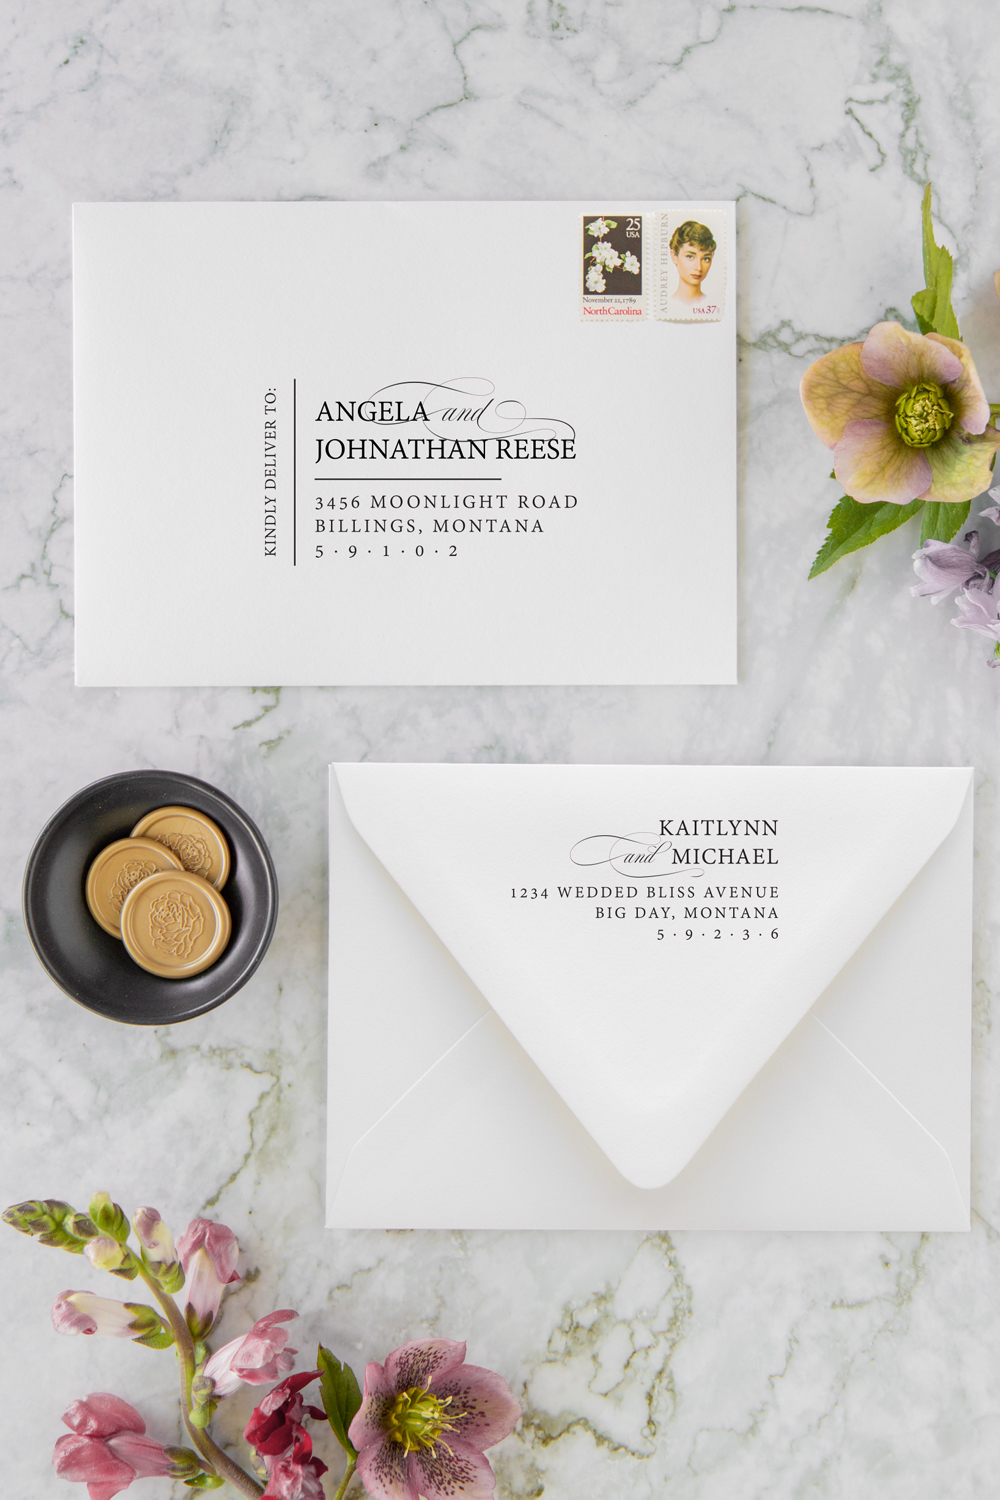 classic-save-the-date-cards-wedding-envelopes-seventhandanderson